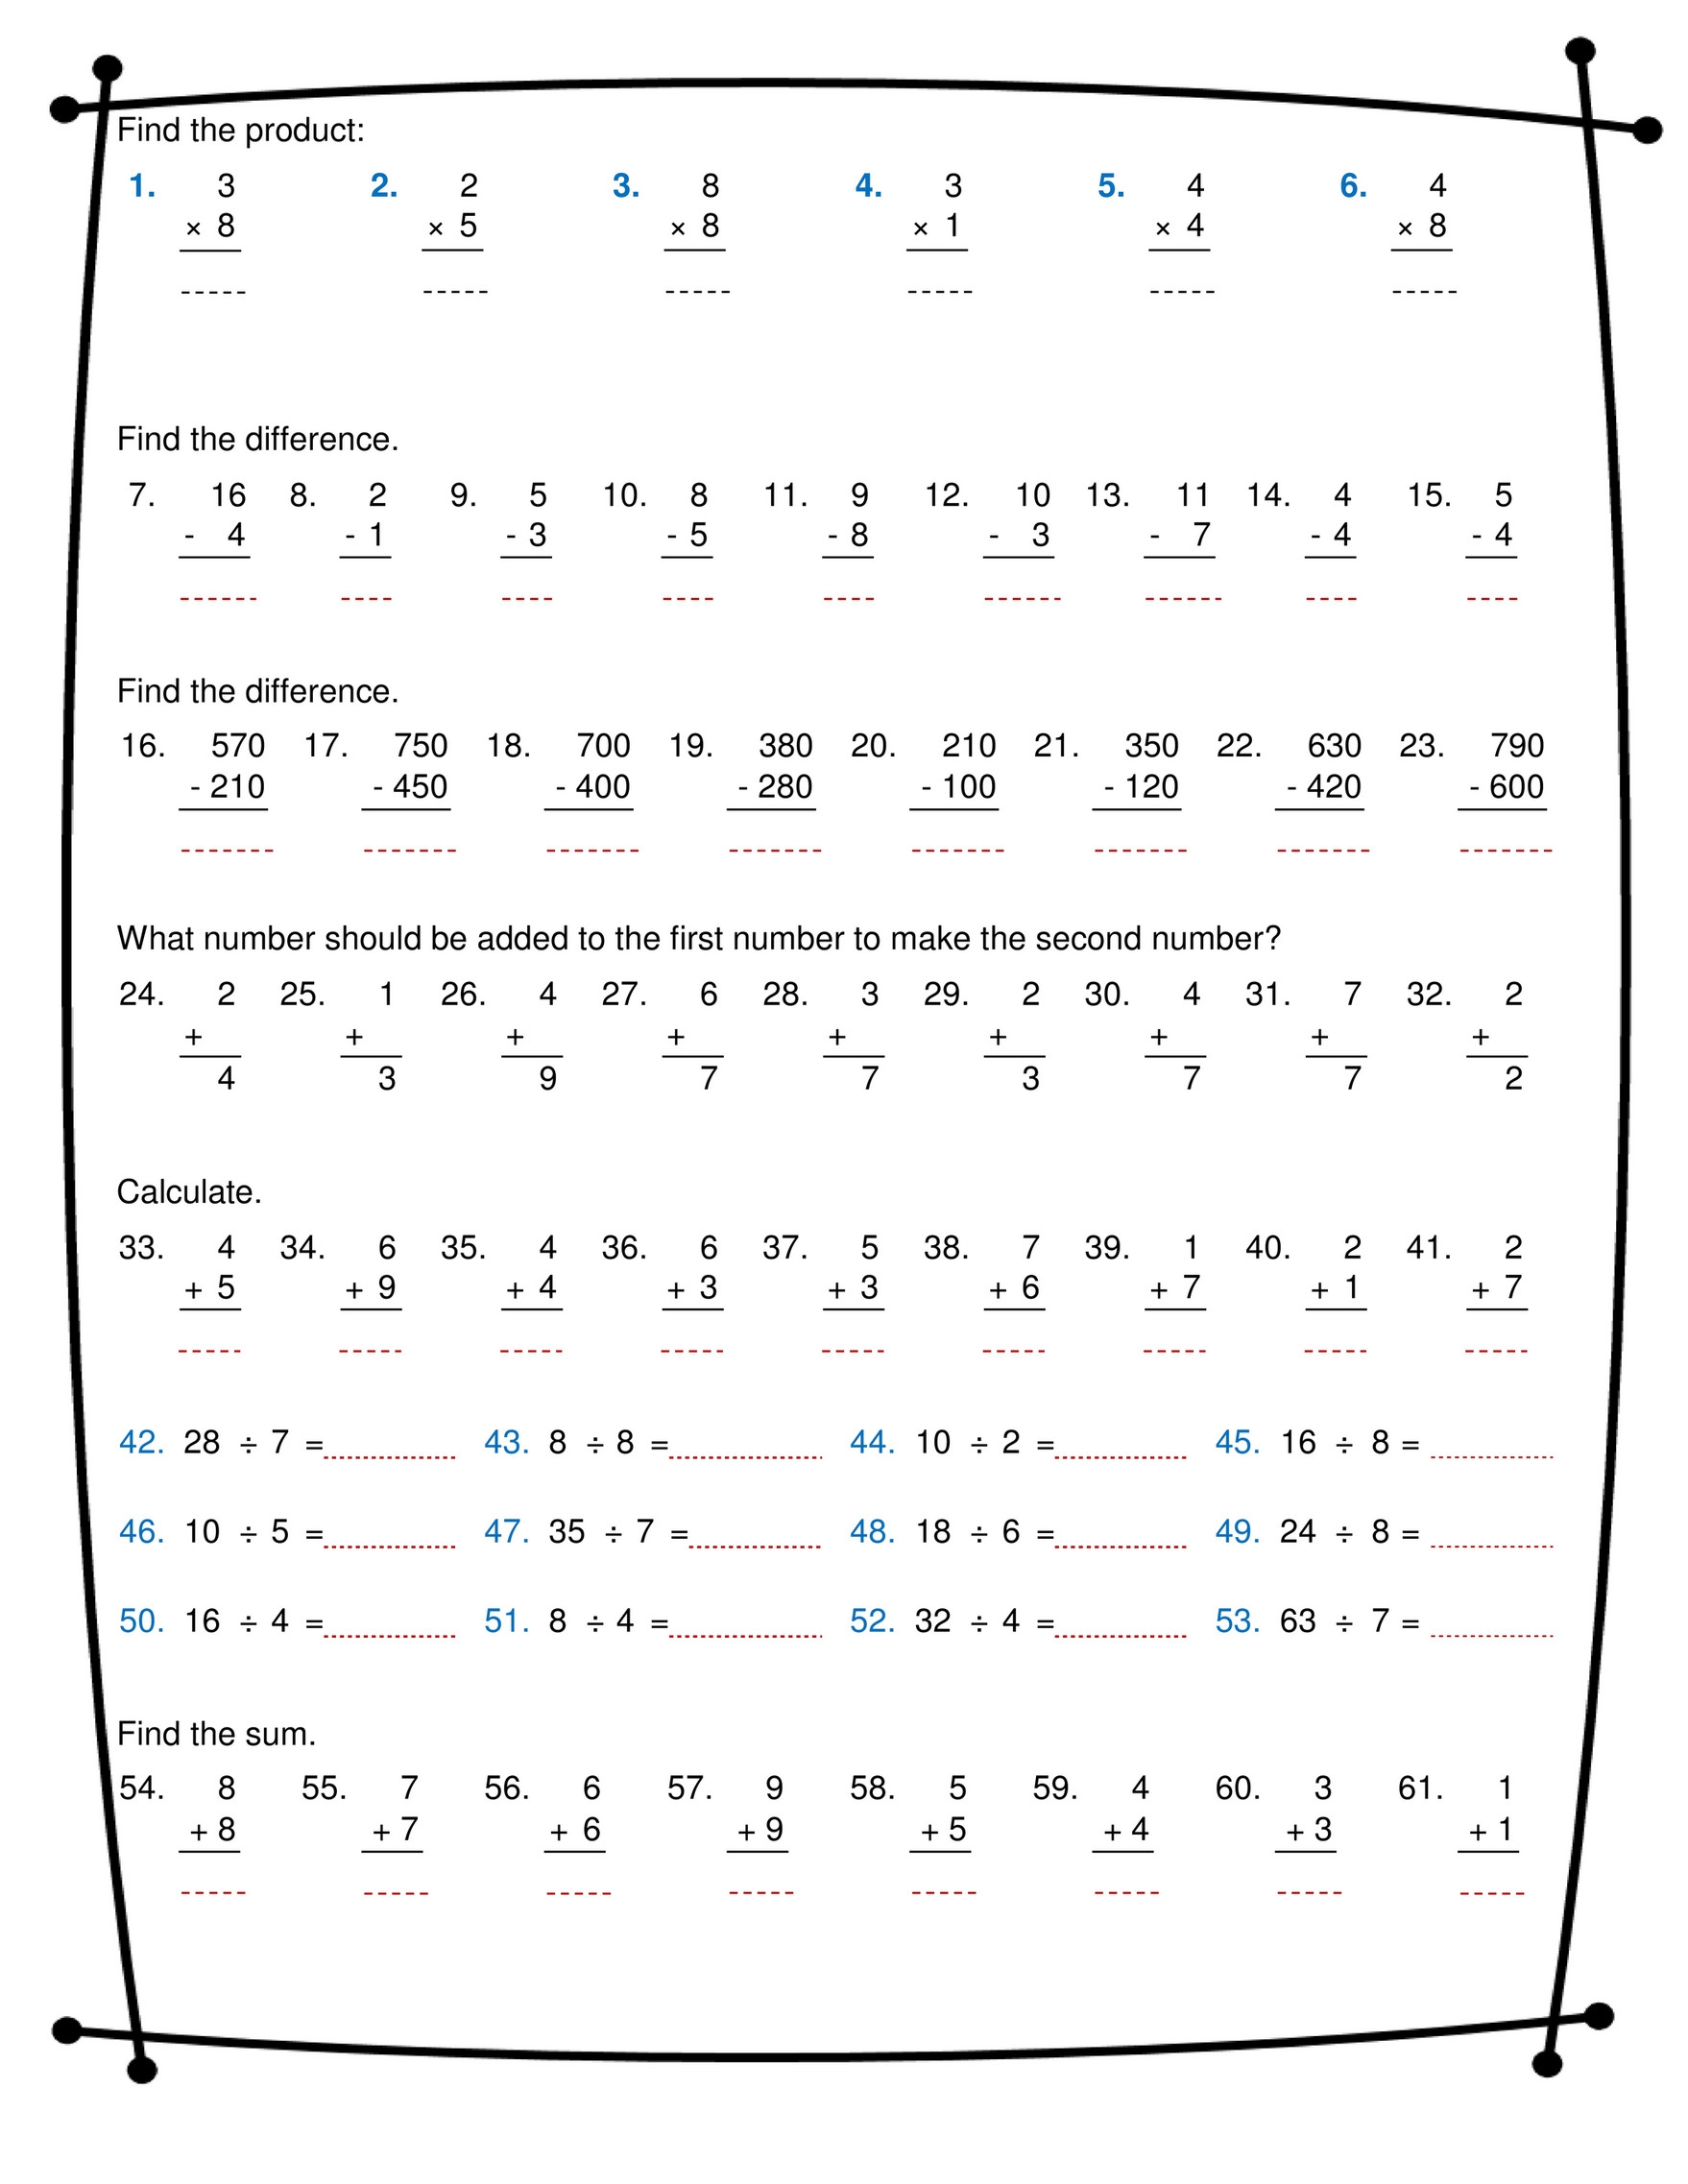 addition-multiplication-subtraction-division-worksheets-printable